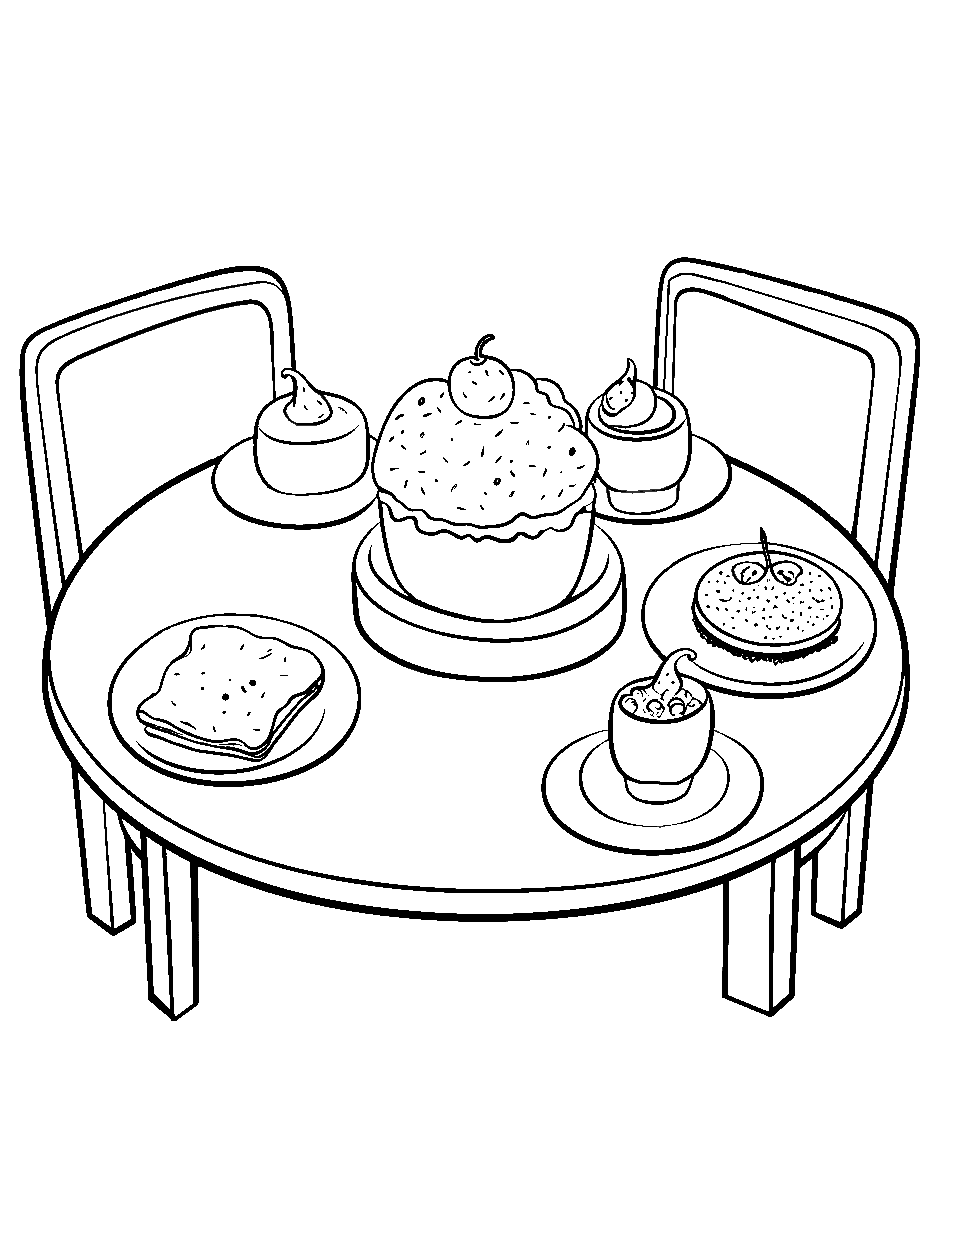 Dine-In Delight Food Coloring Page - A cozy dining table with food.